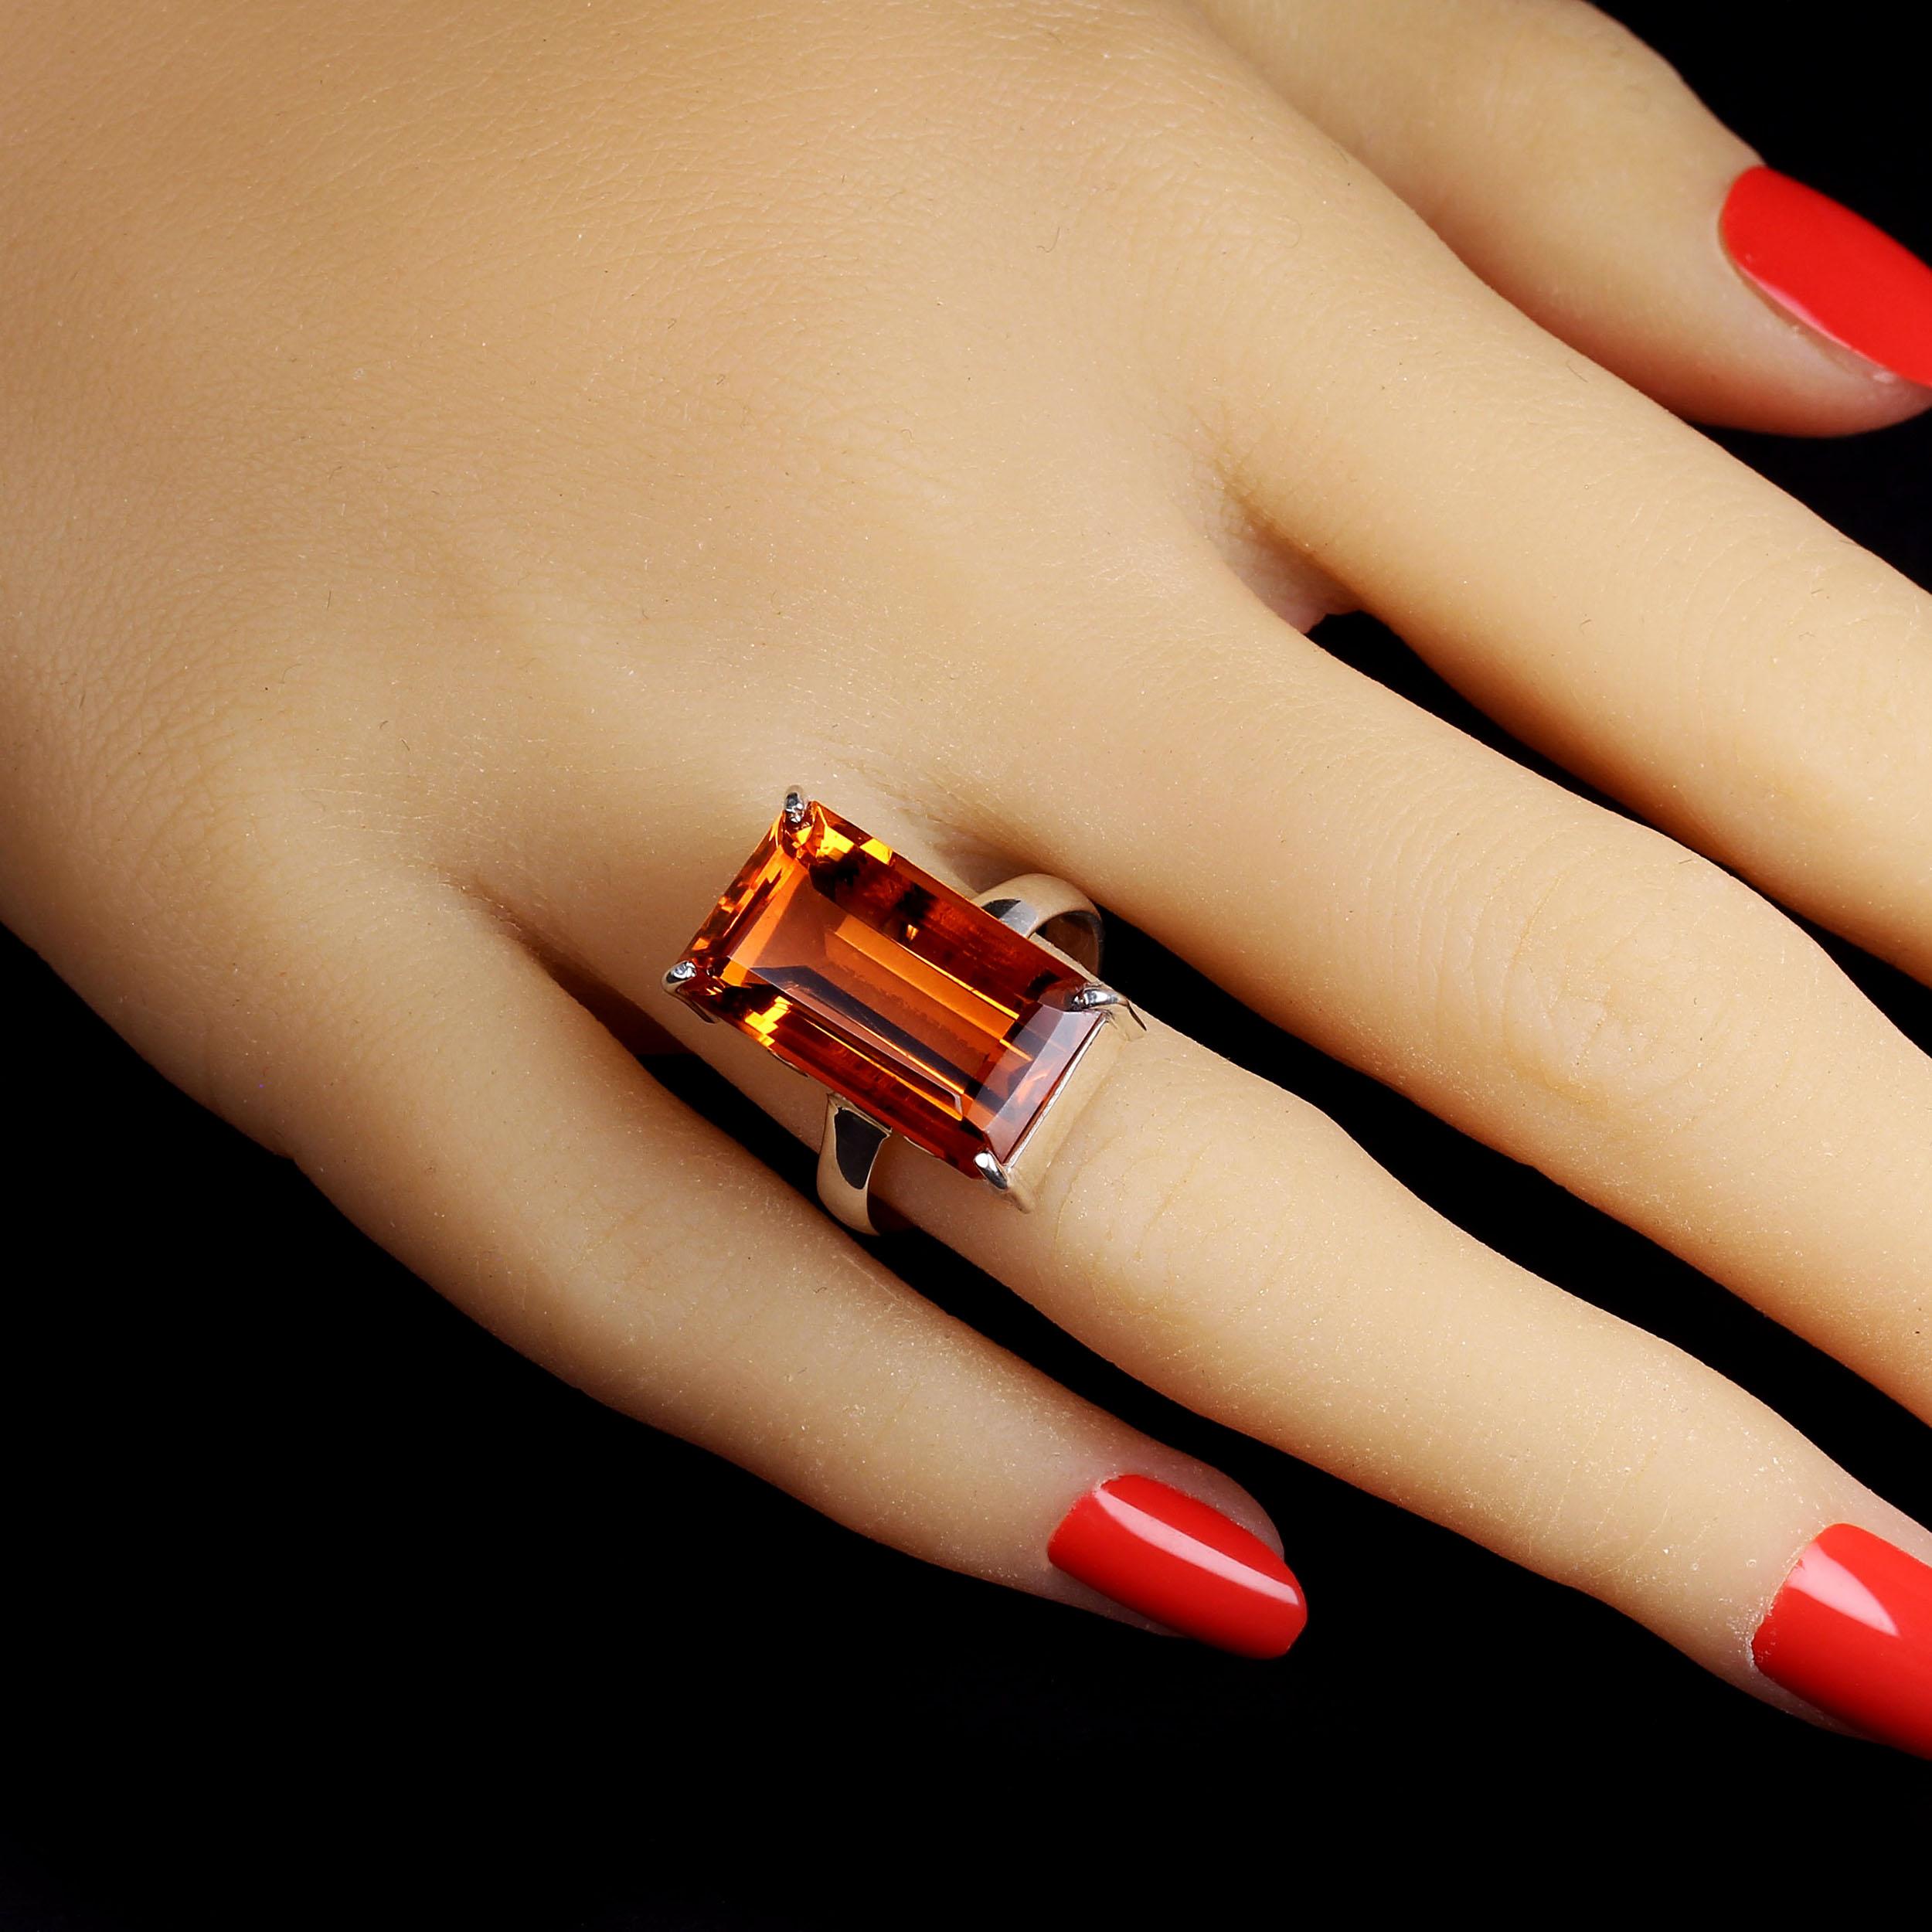 Stunning Brazilian emerald cut Citrine in Sterling Silver ring. This elegantly simple ring comes from our favorite vendor in Belo Horizonte, Minas Gerais, Brazil. He mines many of his own gemstones.  If not, he buys the rough and has it cut to his